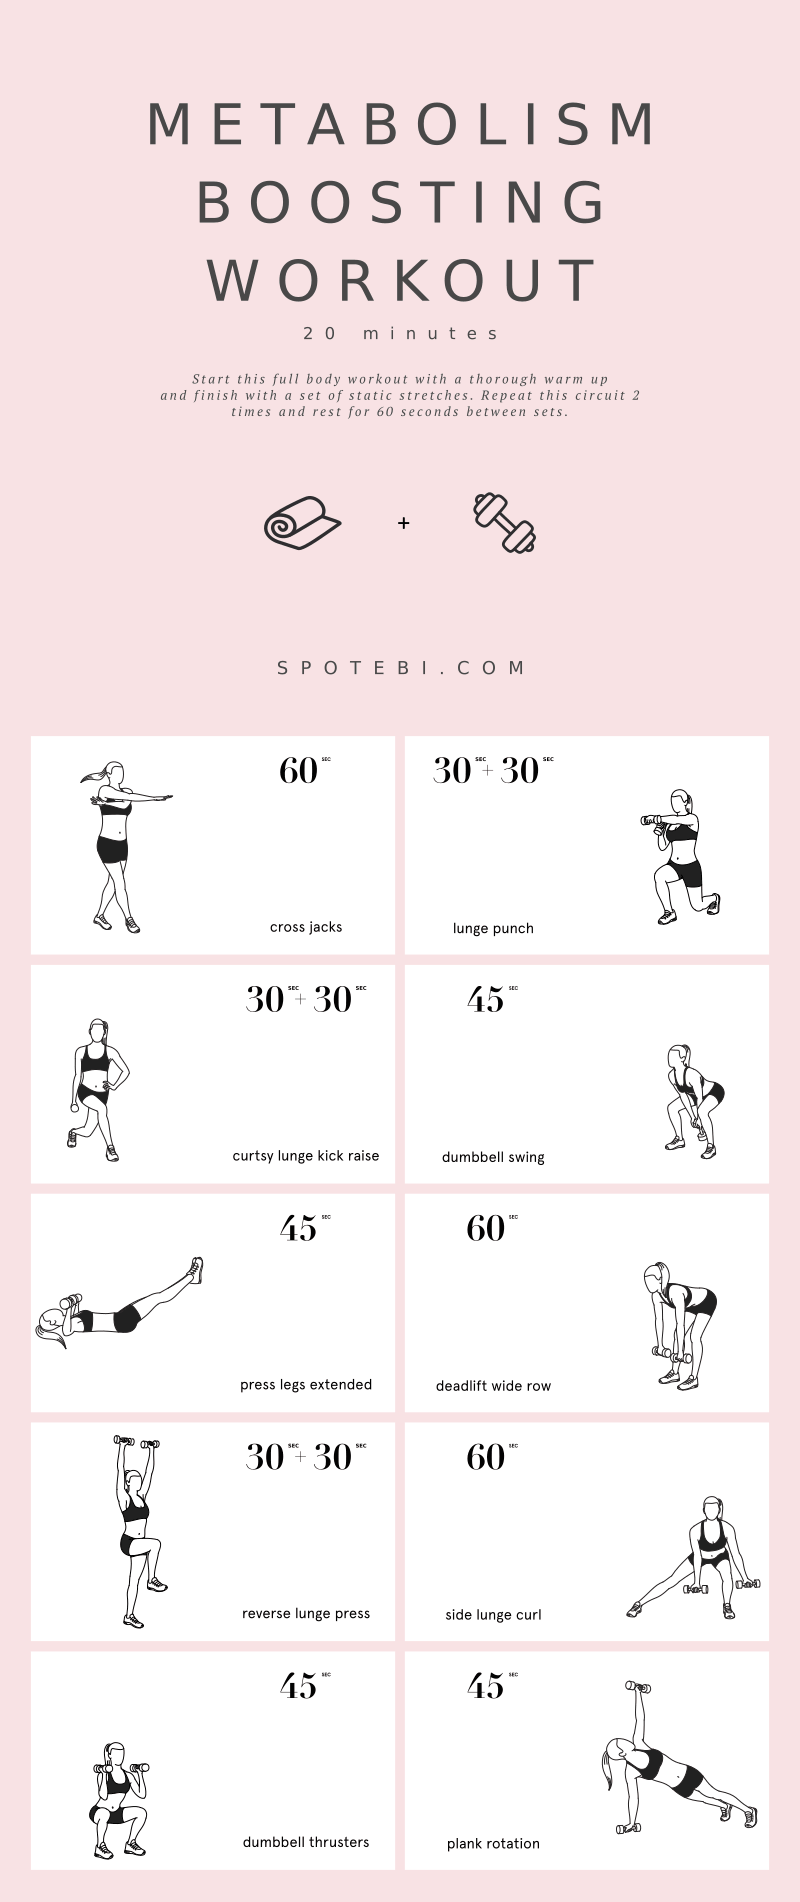 The secret to burning calories and ultimately losing weight is to maximize the efficiency of your energy systems. This 20-Minute Metabolism Boosting Workout is designed to help you do just that! https://www.spotebi.com/workout-routines/20-minute-metabolism-boosting-workout/